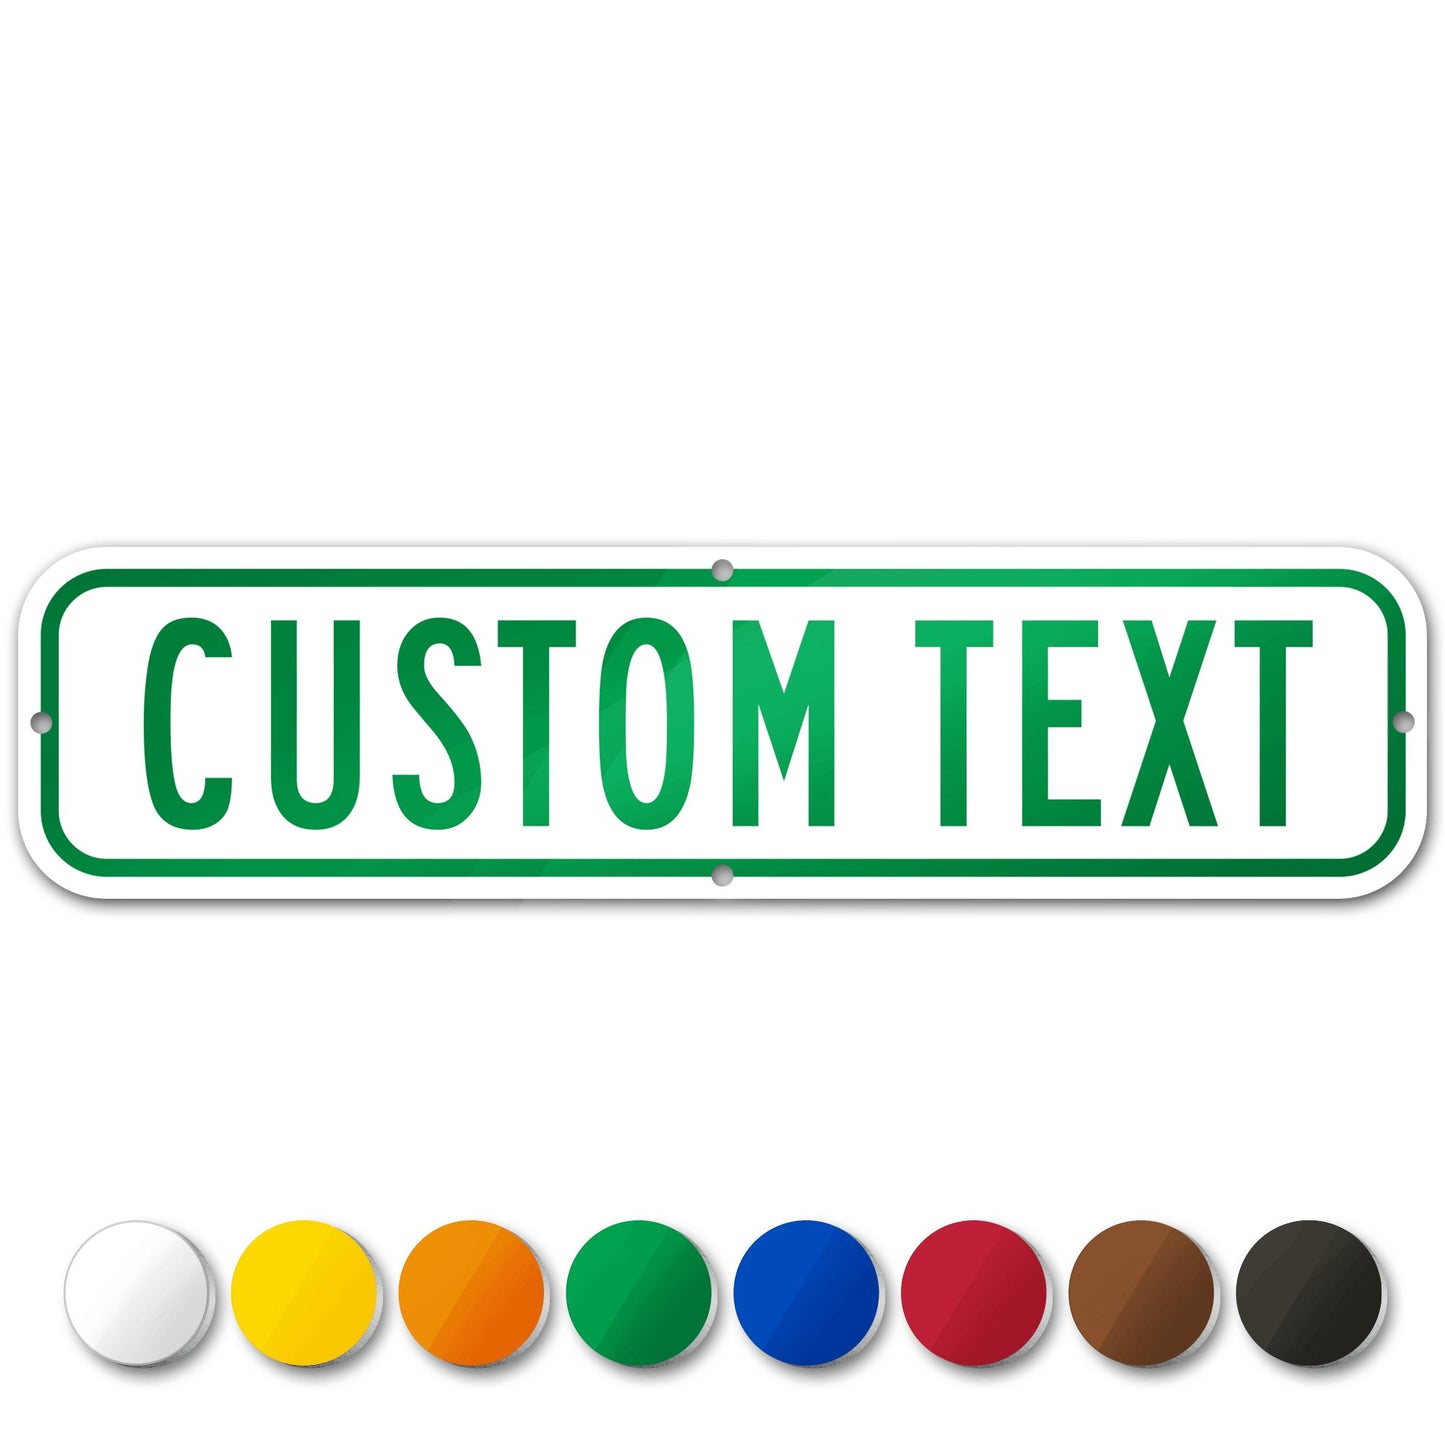 Custom Street Sign Personalized Road Signs Room Decor 9